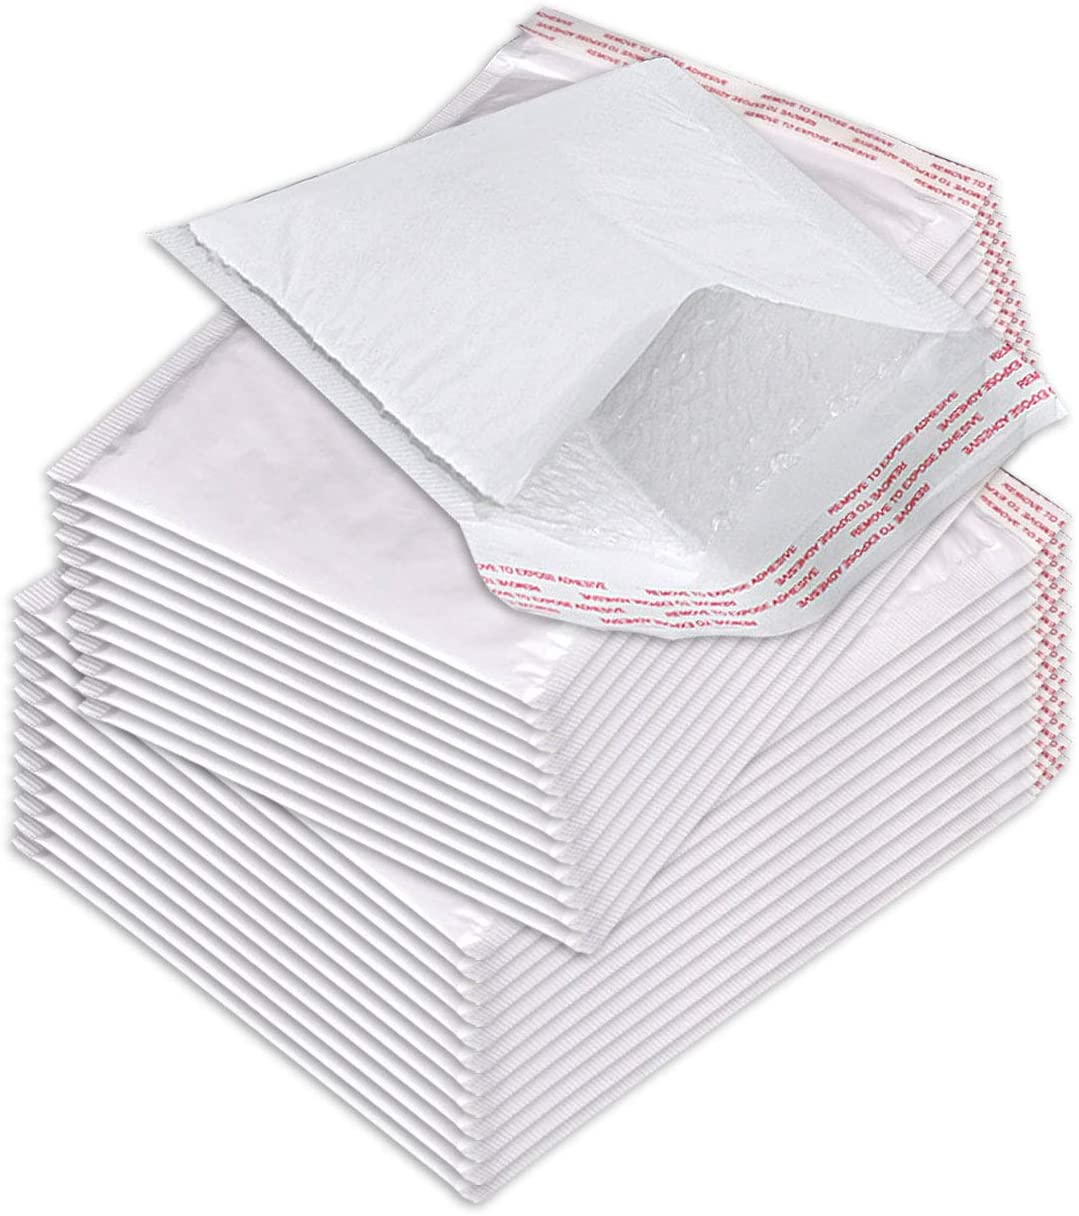 500Pcs Poly Bubble Mailers, 6x10 Inch Padded Envelopes Bulk #000, Bubble Lined Wrap Polymailer Bags for Shipping/ Packaging/ Mailing Self Seal